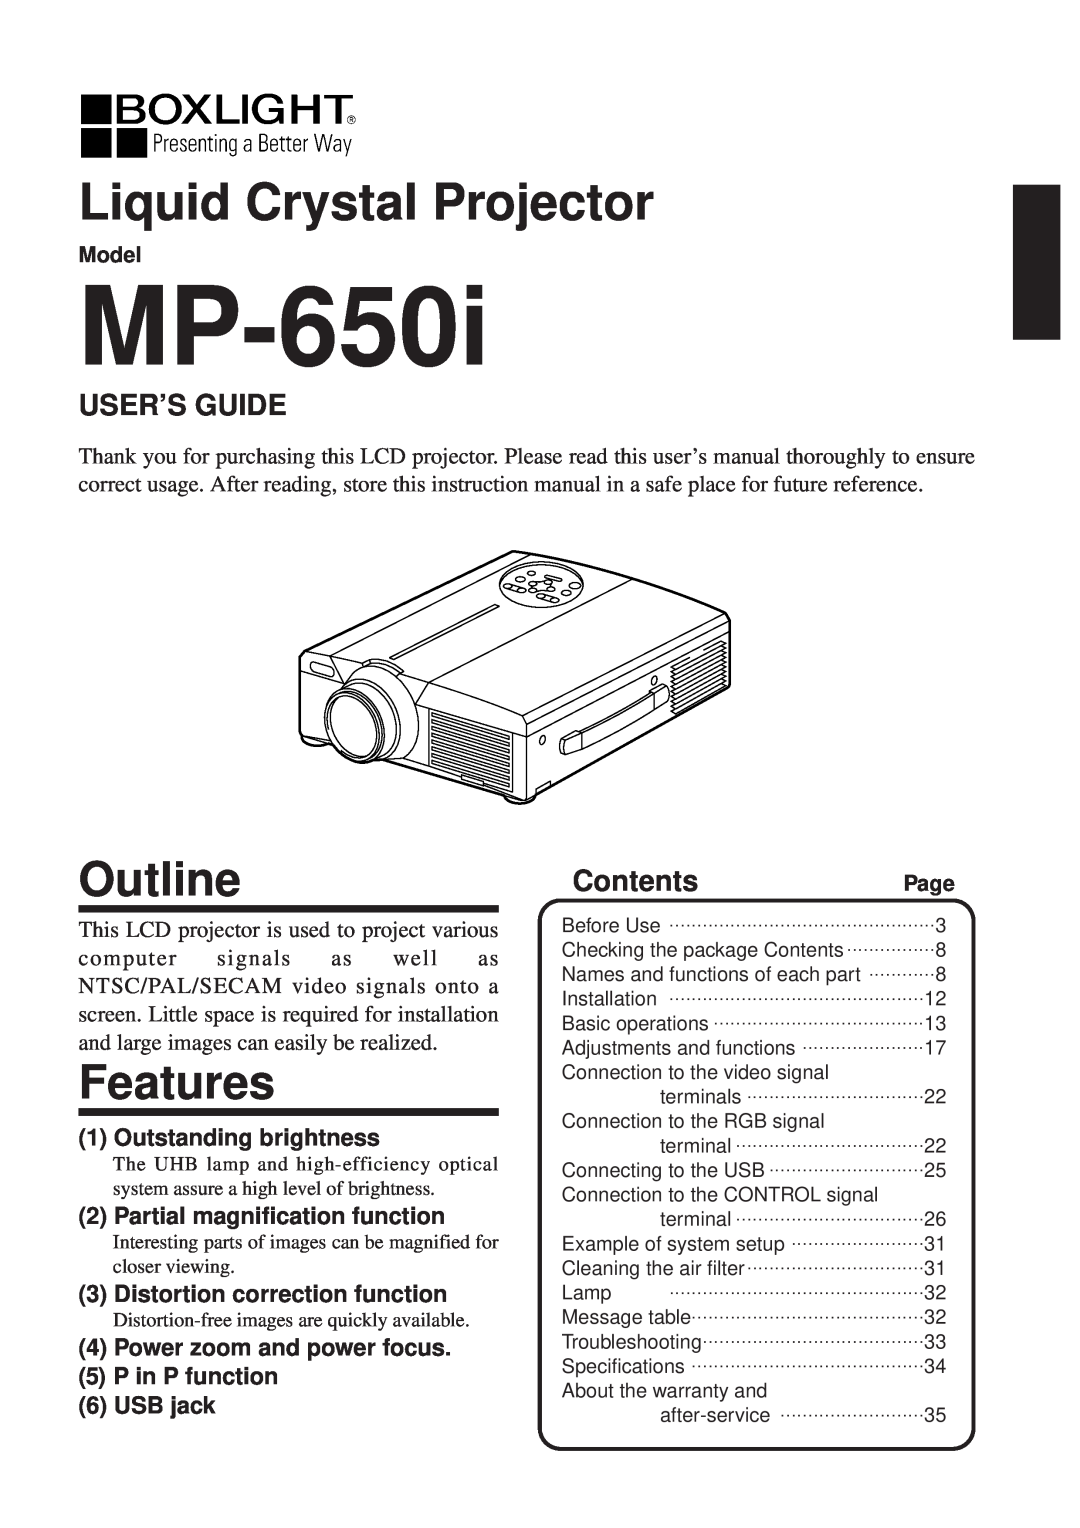 BOXLIGHT MP-650i user manual Liquid Crystal Projector, Outline, Features, User’S Guide, Contents, Outstanding brightness 